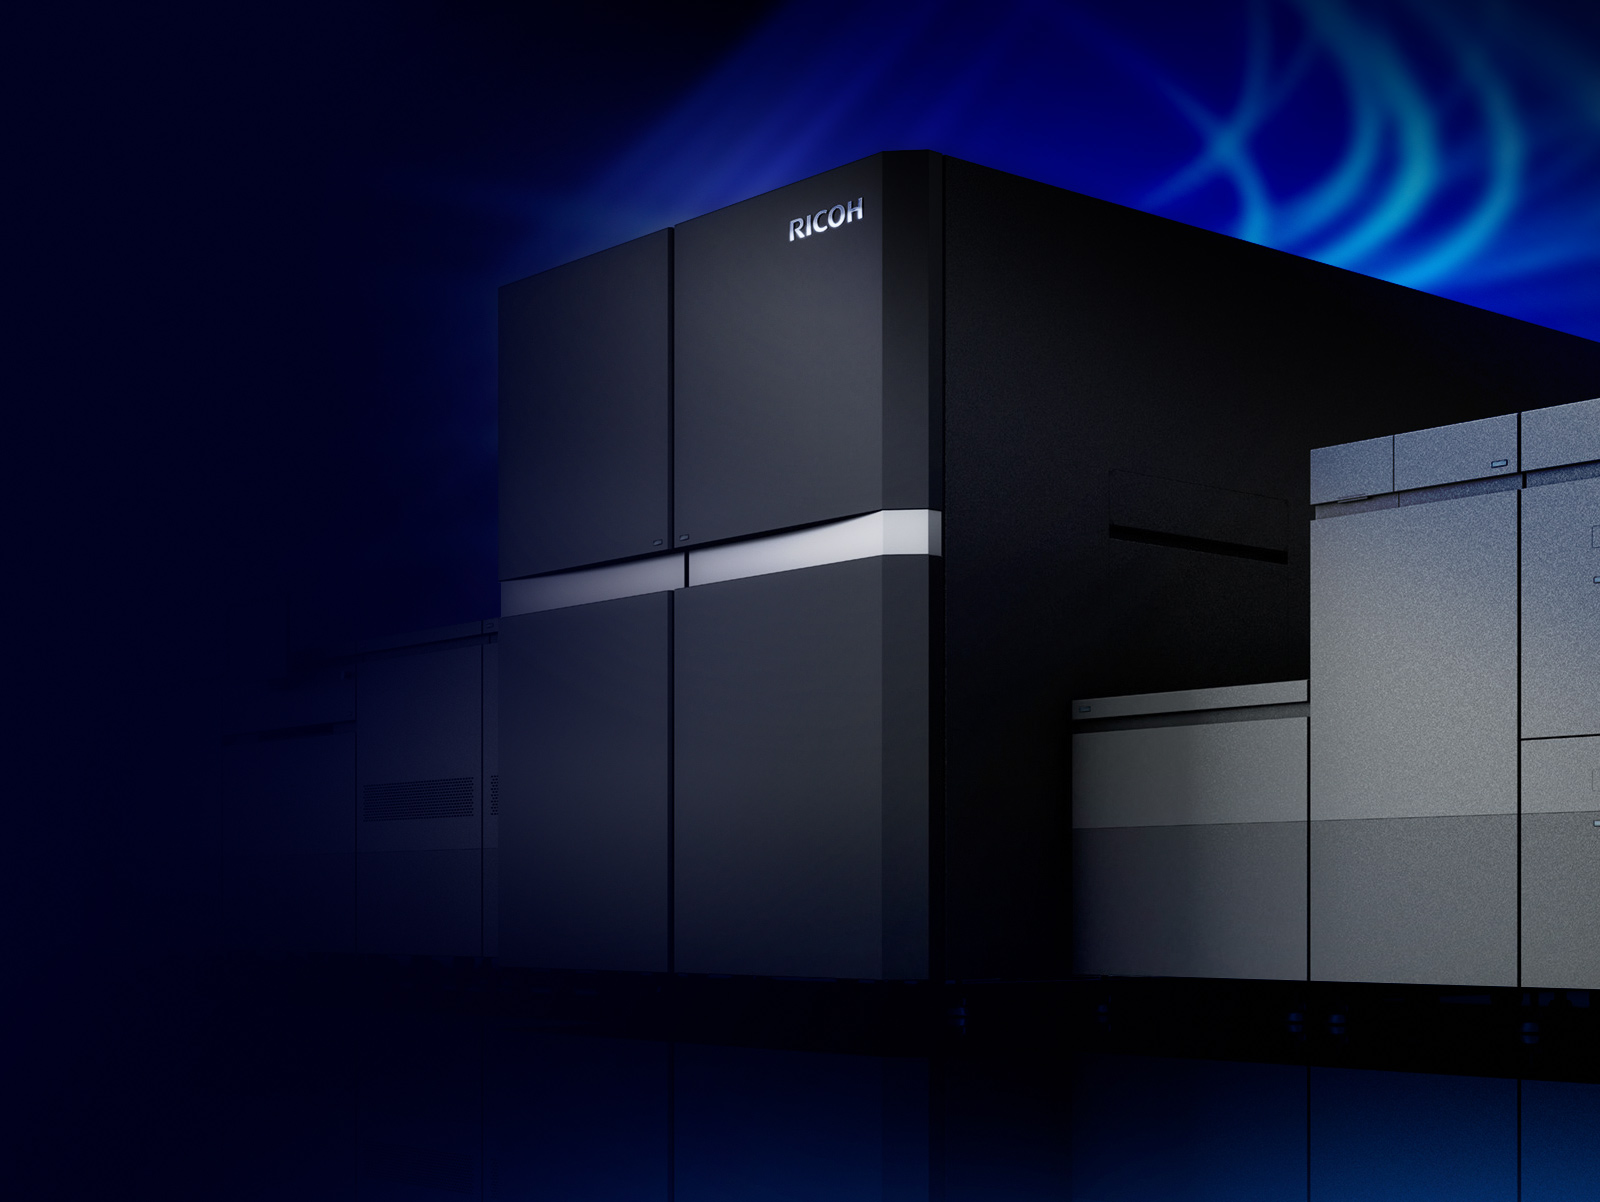 Commercial printers preview the RICOH ProTM Z75 B2 sheetfed inkjet press designed to enable business growth